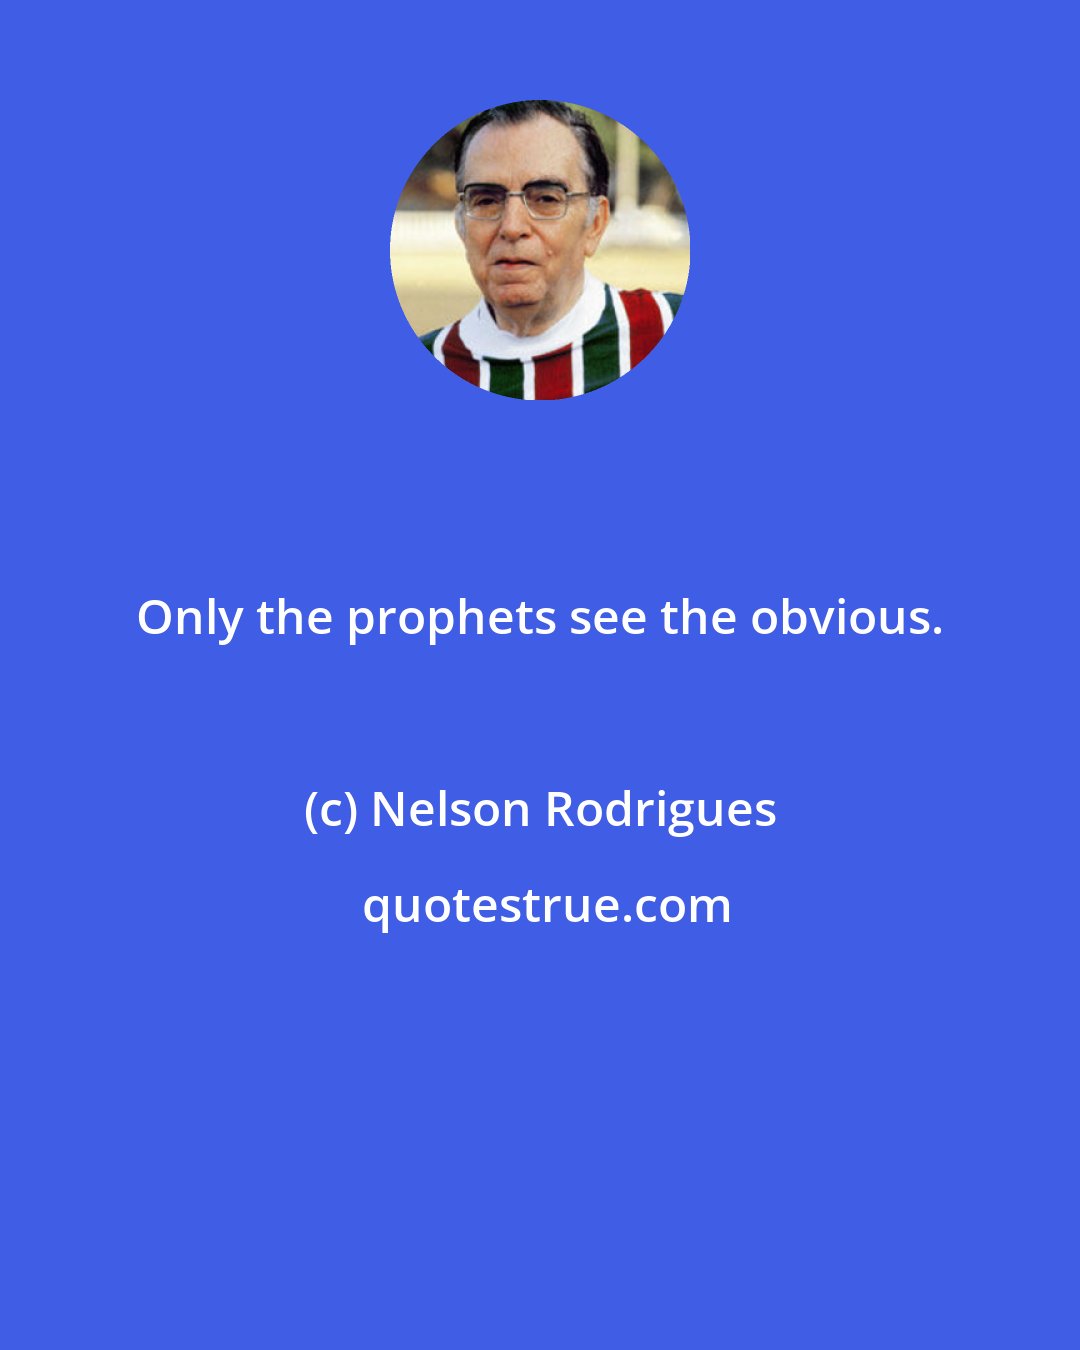 Nelson Rodrigues: Only the prophets see the obvious.